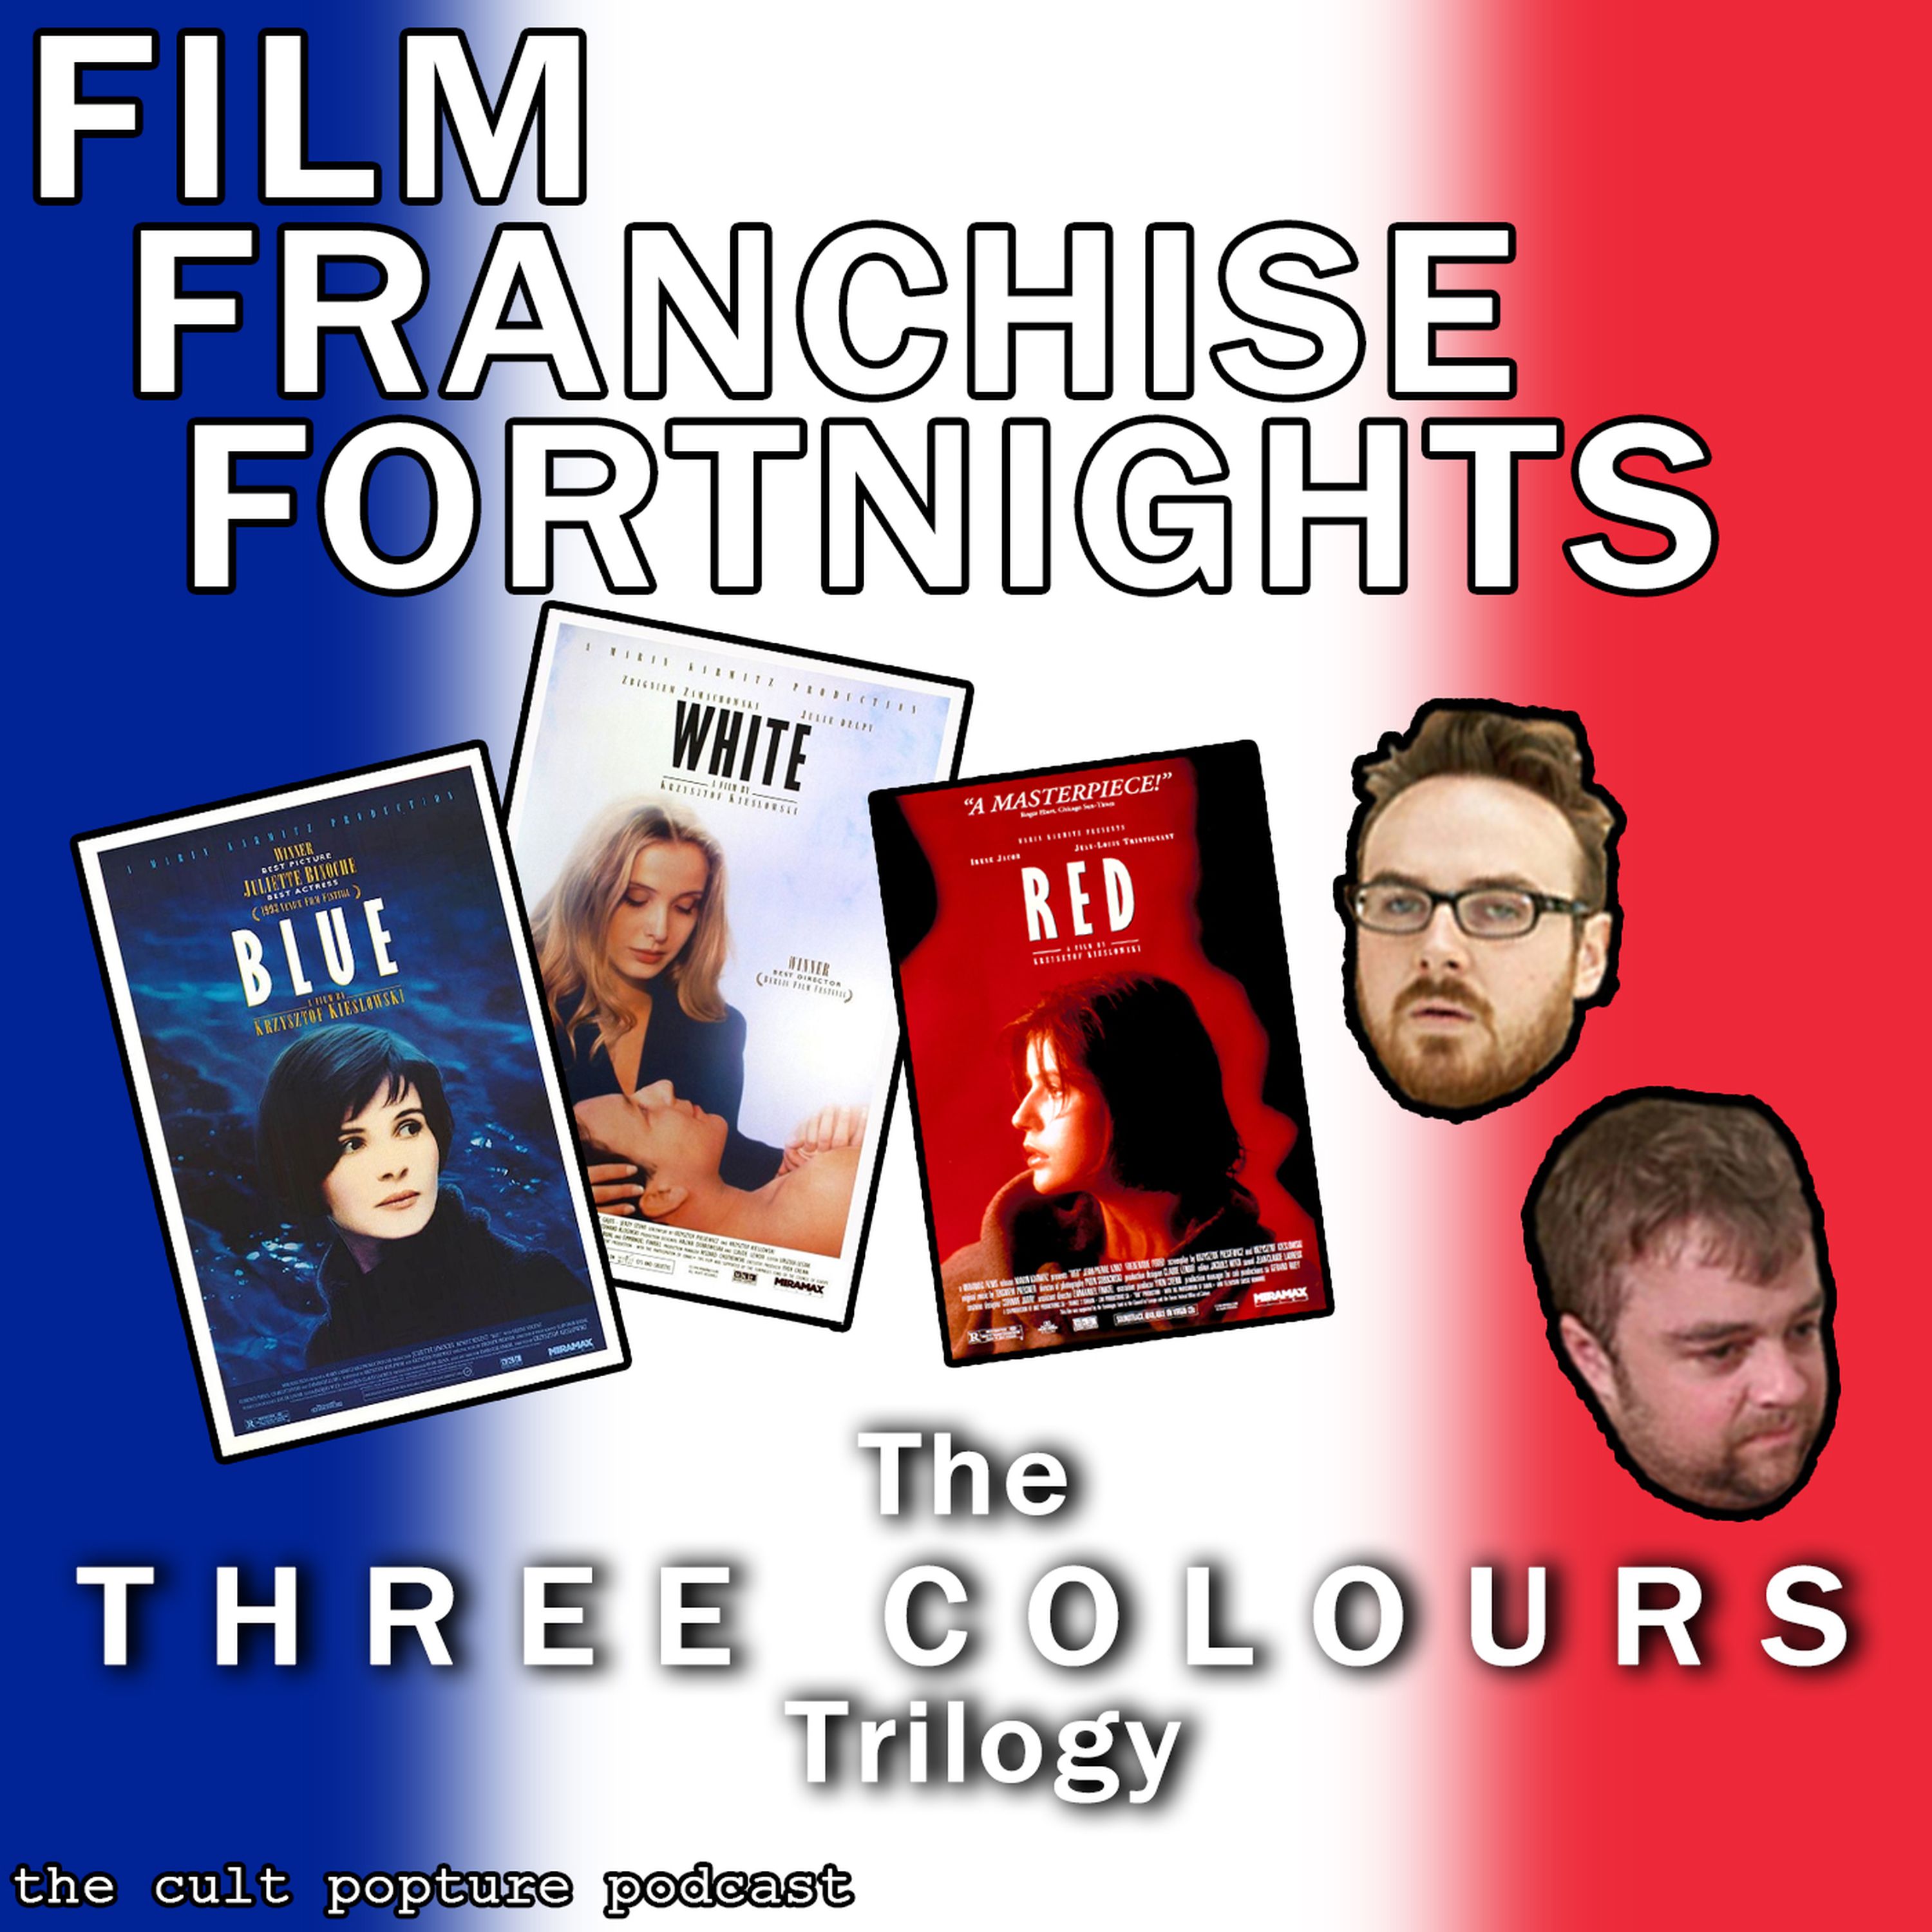 The Three Colours Trilogy | Film Franchise Fortnights